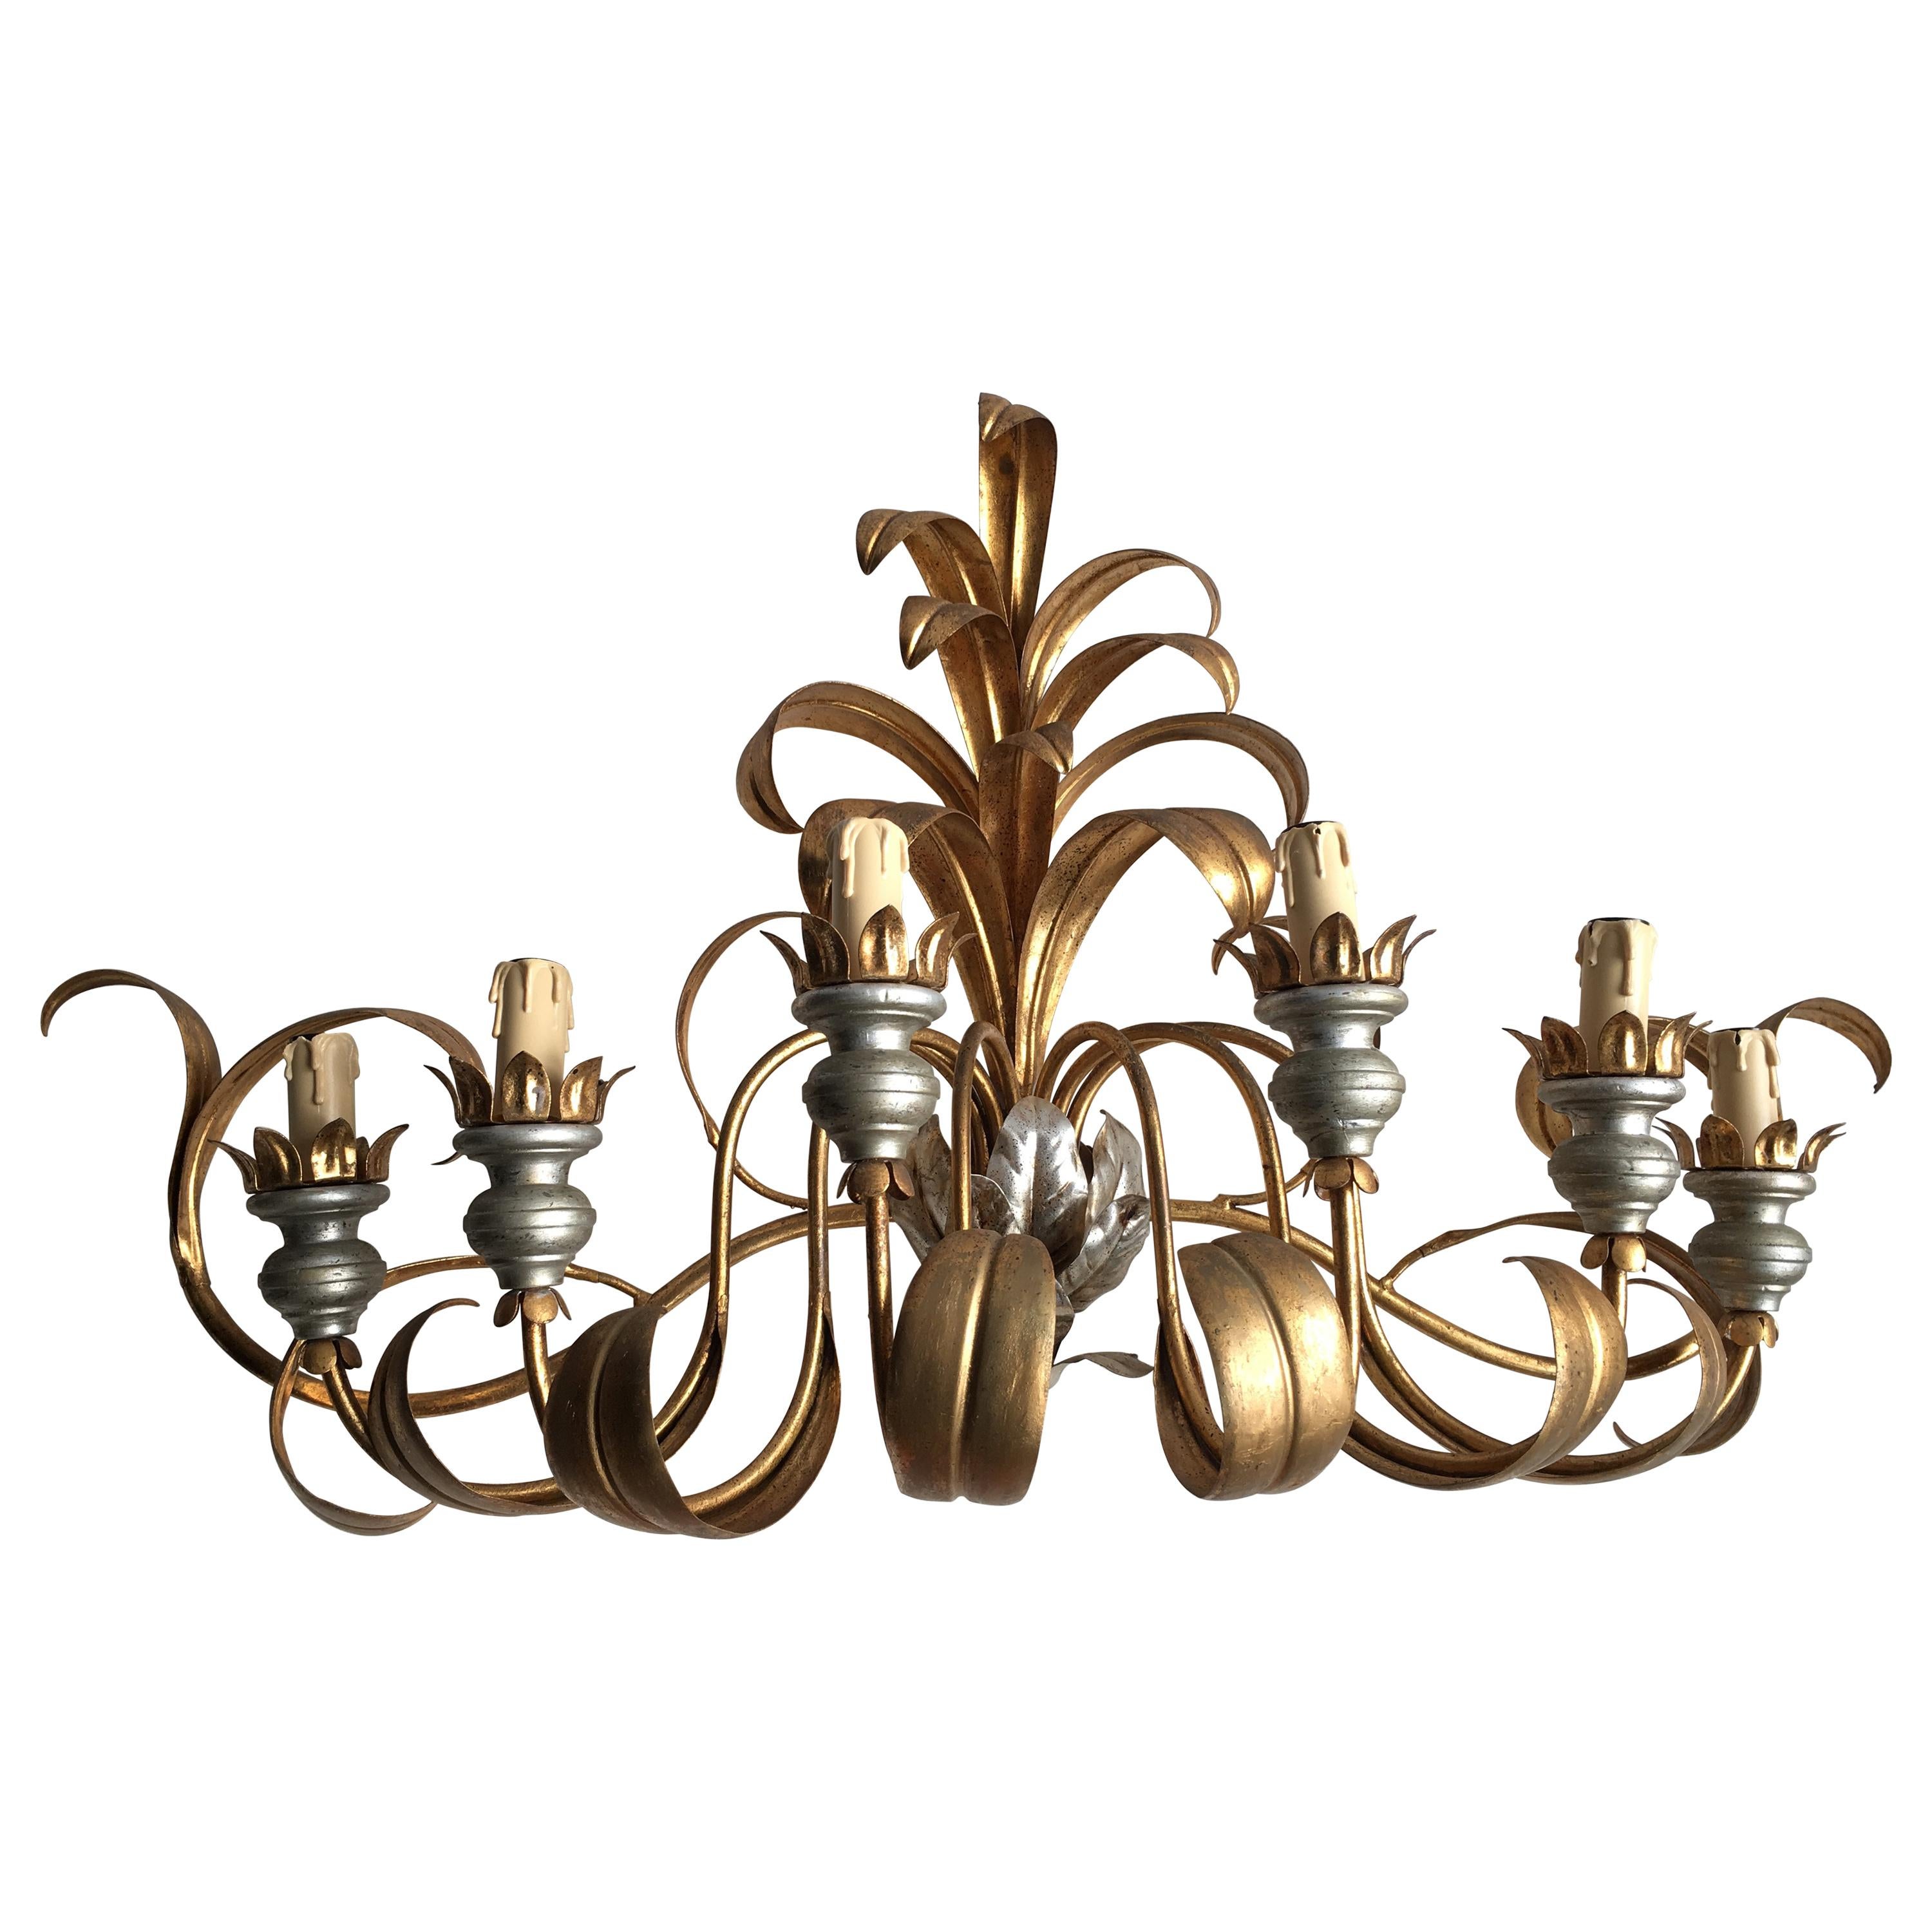 Vintage French Gilt Metal Wall Sconce or Light For Sale